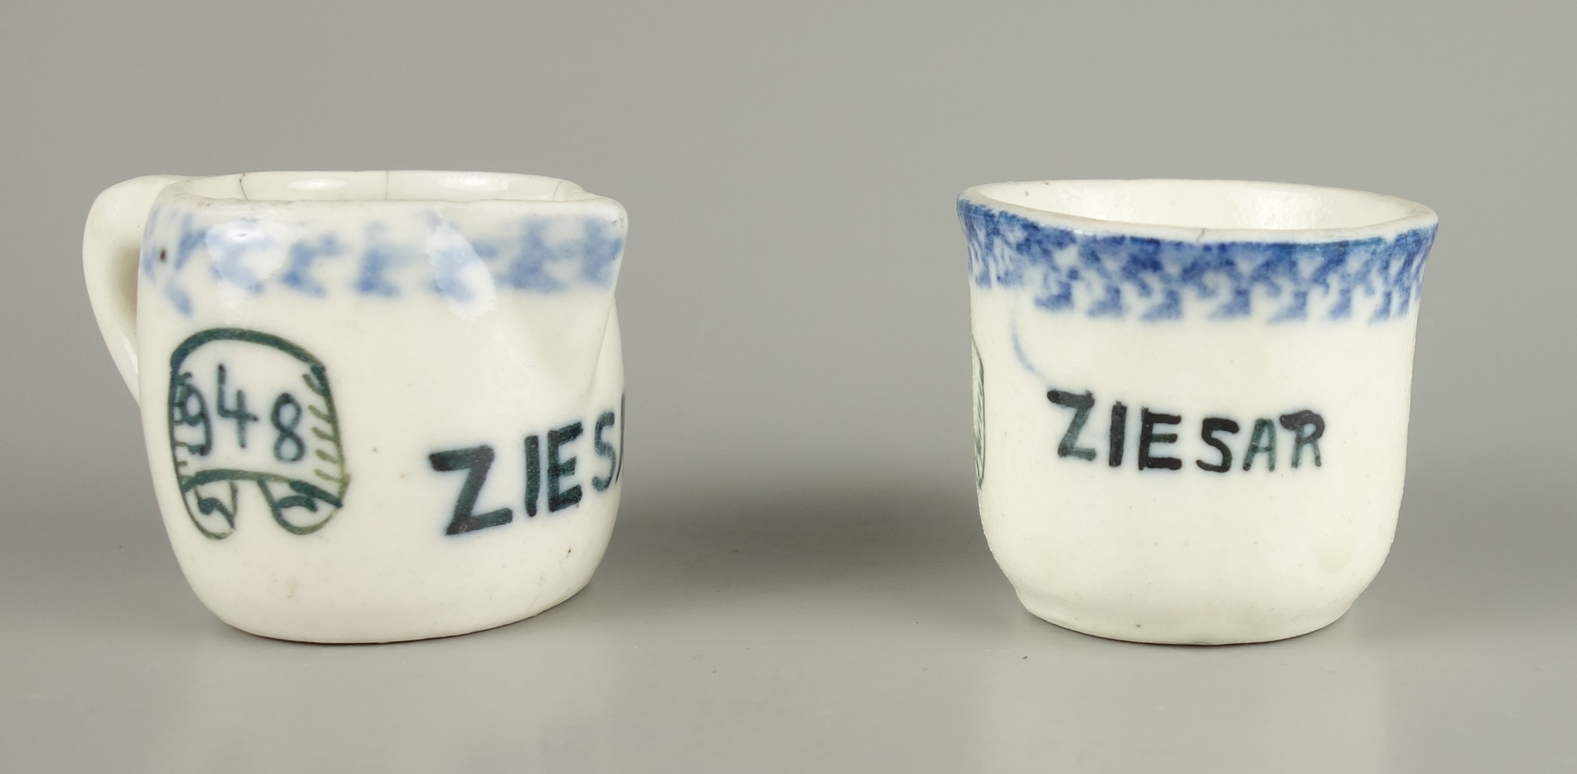 Miniature cup and jug, on the occasion of the 1000 year celebration of Ziesar, Brandenburg, 1948 - Image 3 of 3